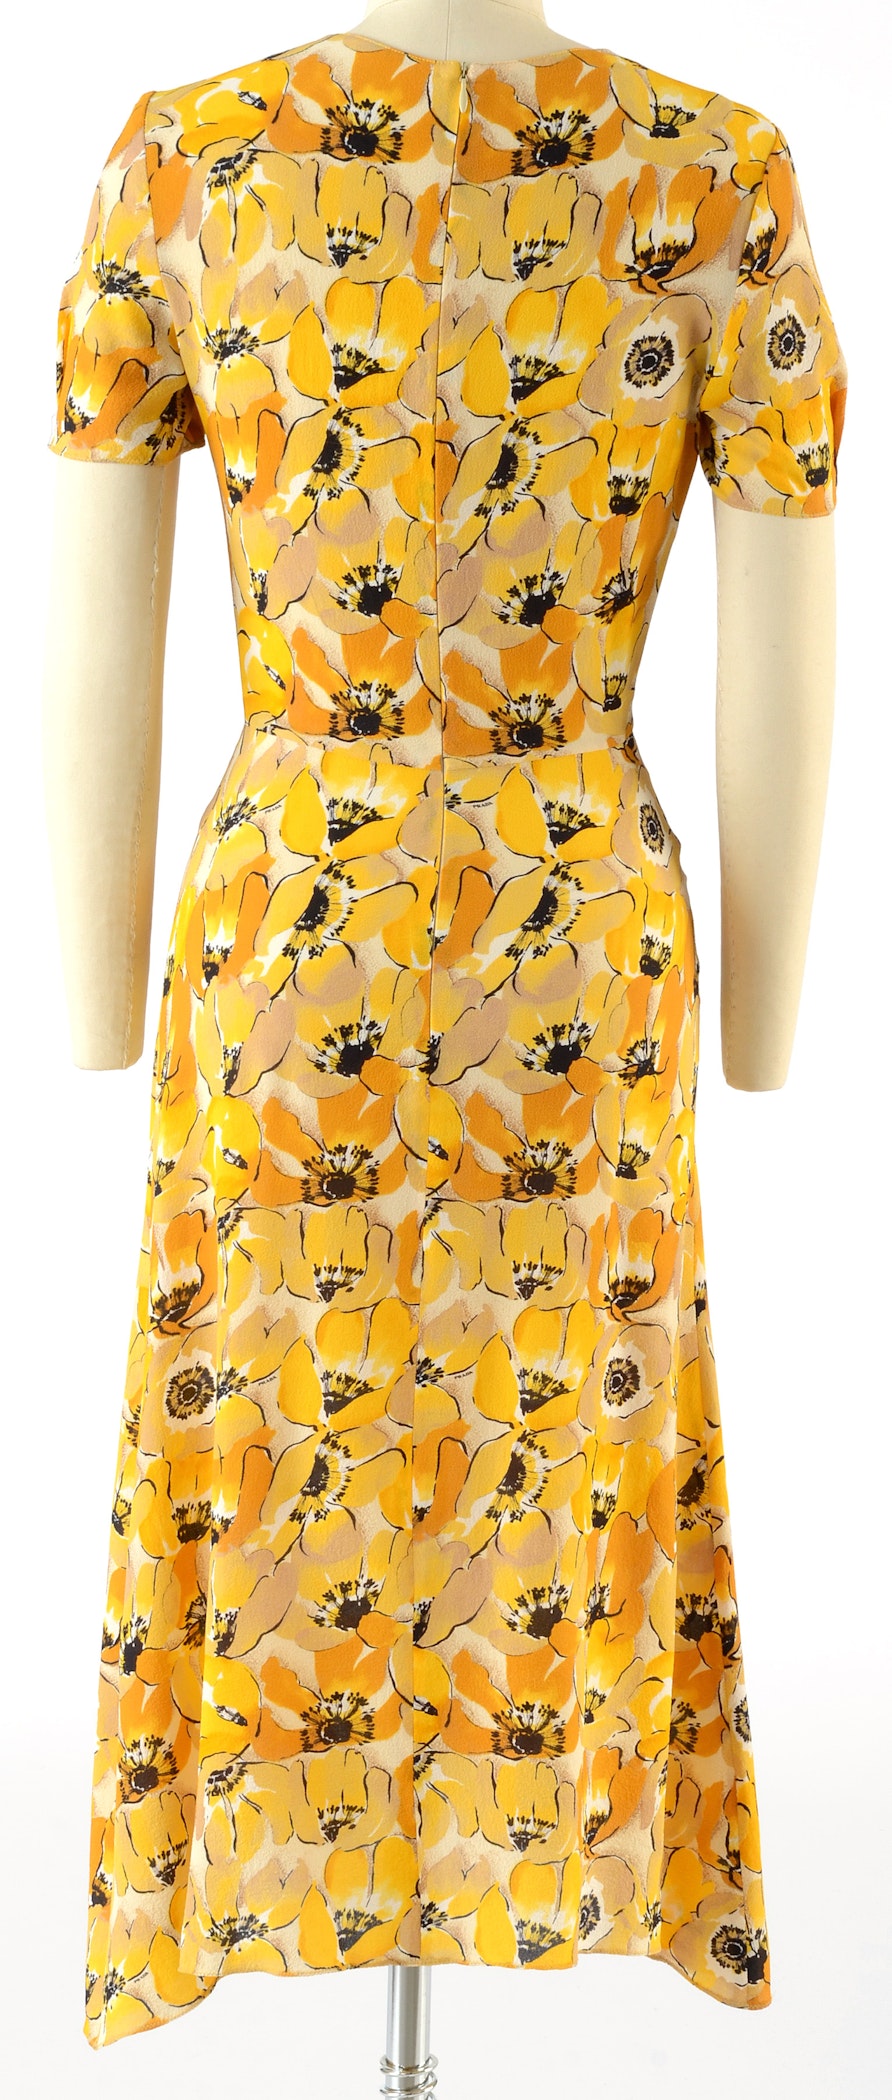 Prada Poppy Floral Print Silk Dress from the Fall of 2000 Ready-To-Wear Collection | EBTH